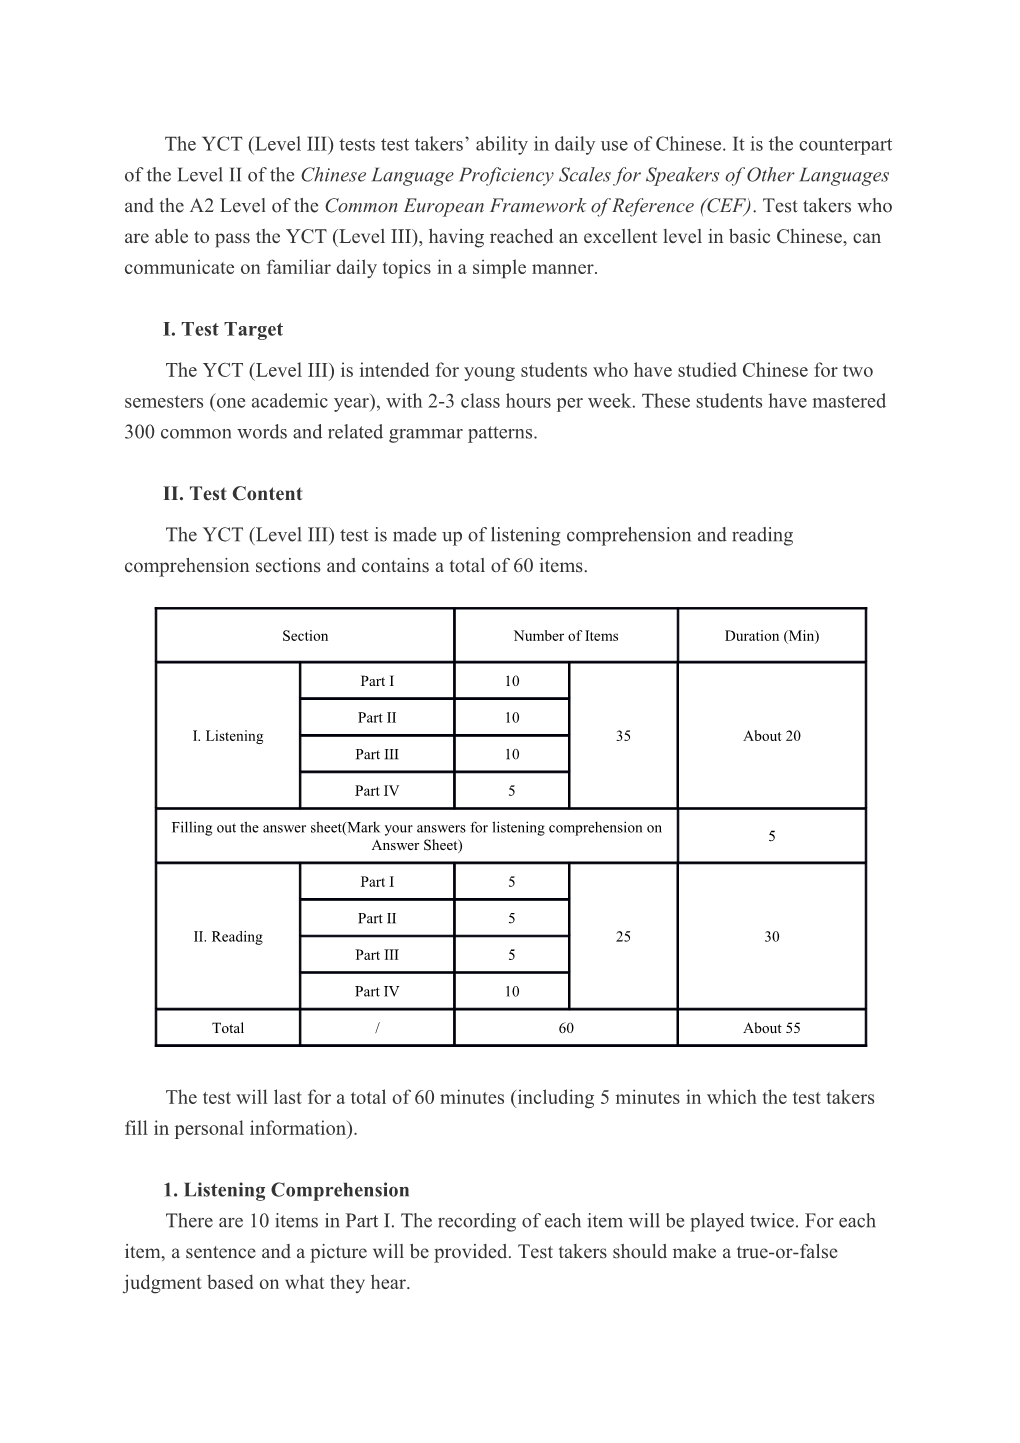 The YCT (Level III) Tests Test Takers Ability in Daily Use of Chinese. It Is the Counterpart